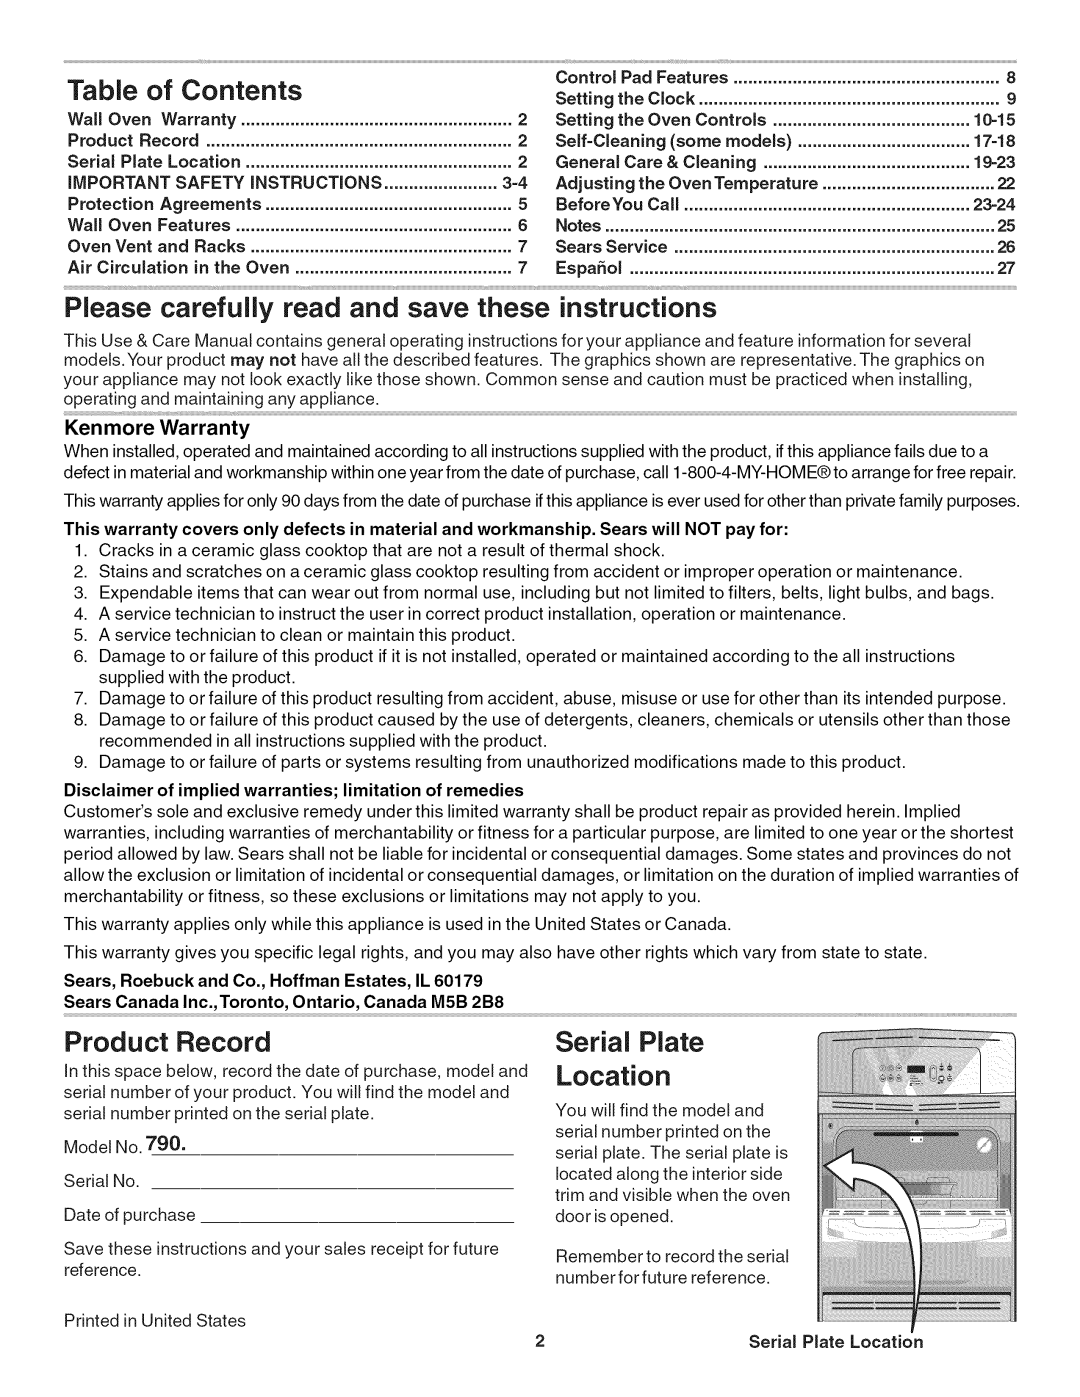 Kenmore 790.4019 manual Table of Contents, Please carefully read and save these instructions, Product Record, Serial Plate 